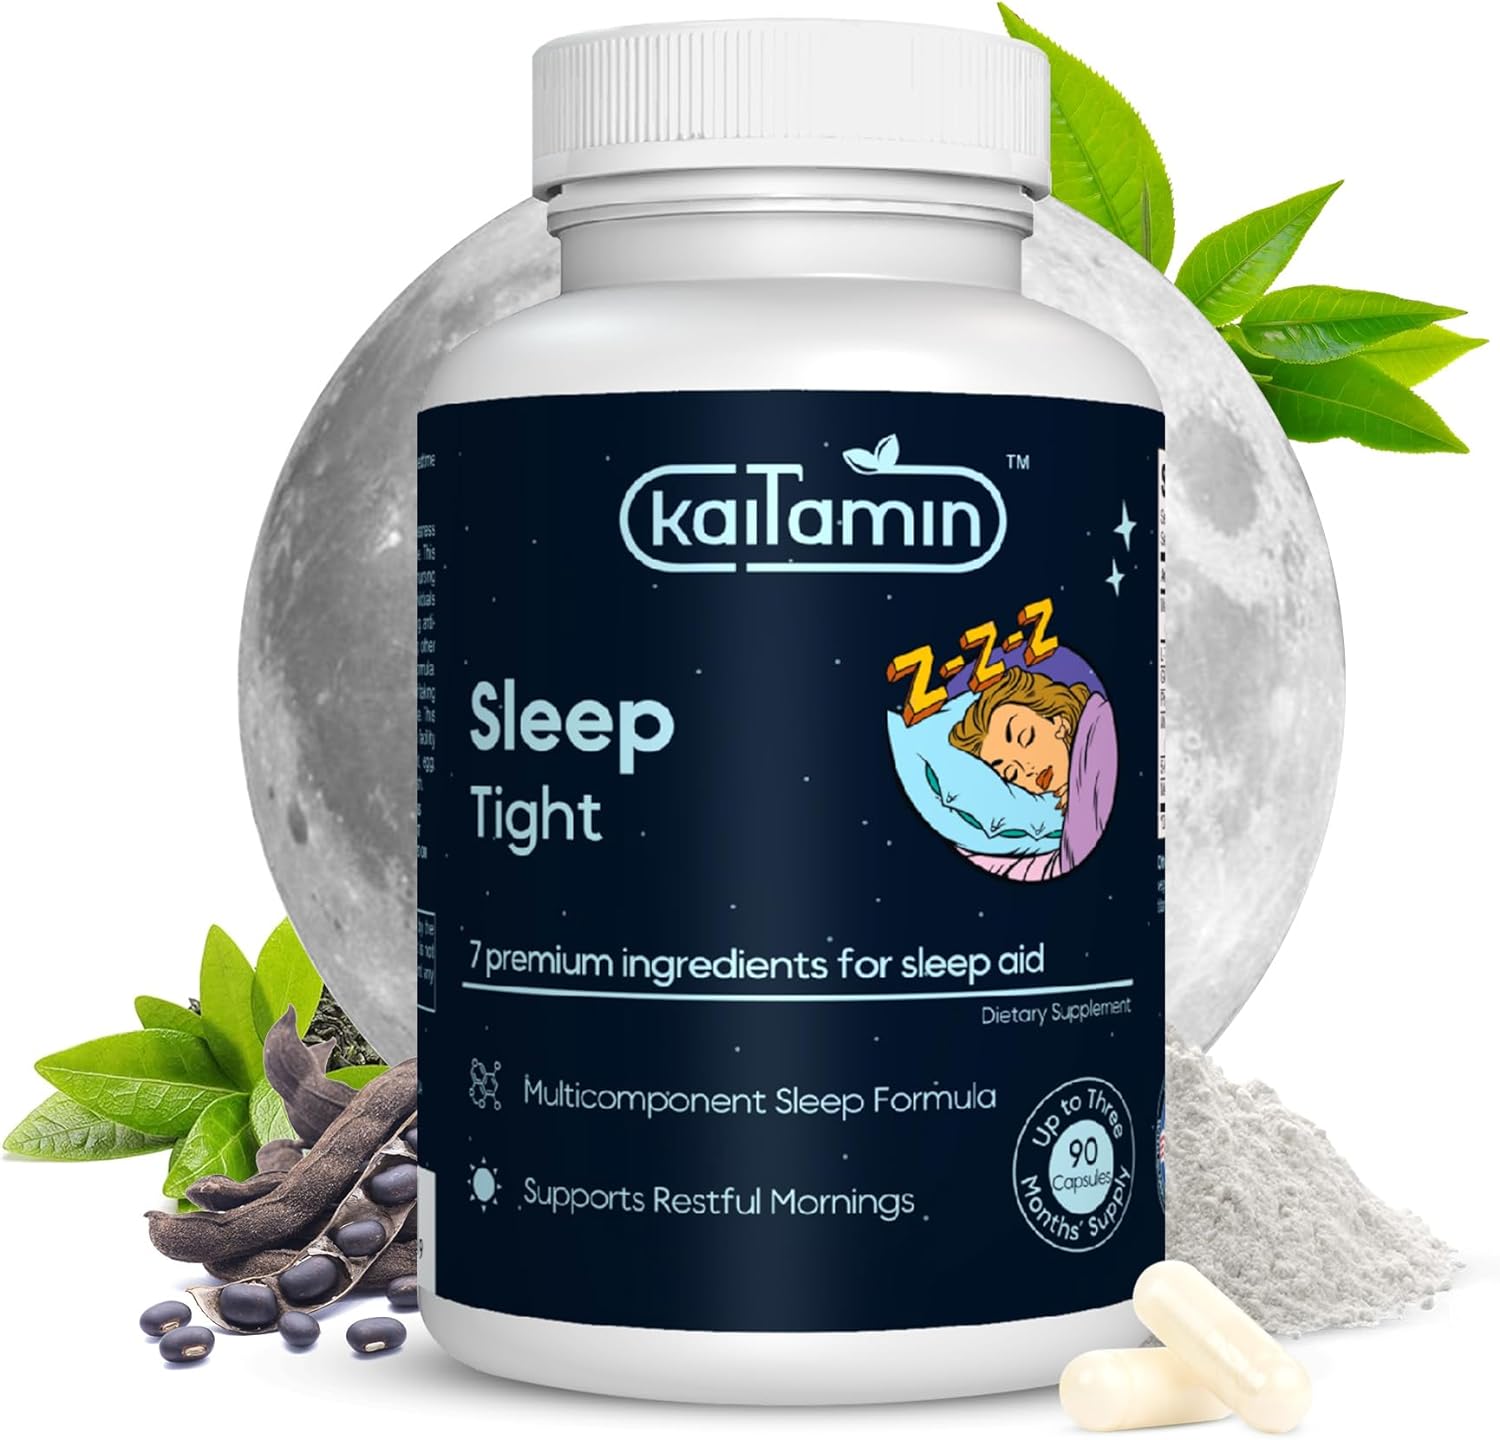 Melatonin Natural Sleep Aid, Theanine, 5-HTP, GABA, Mucuna pruriens, Phellodendron and Magnesium for Sleep & Stress Support, 90 Capsules 45 Days Supply - 7 in 1 Sleep Aid